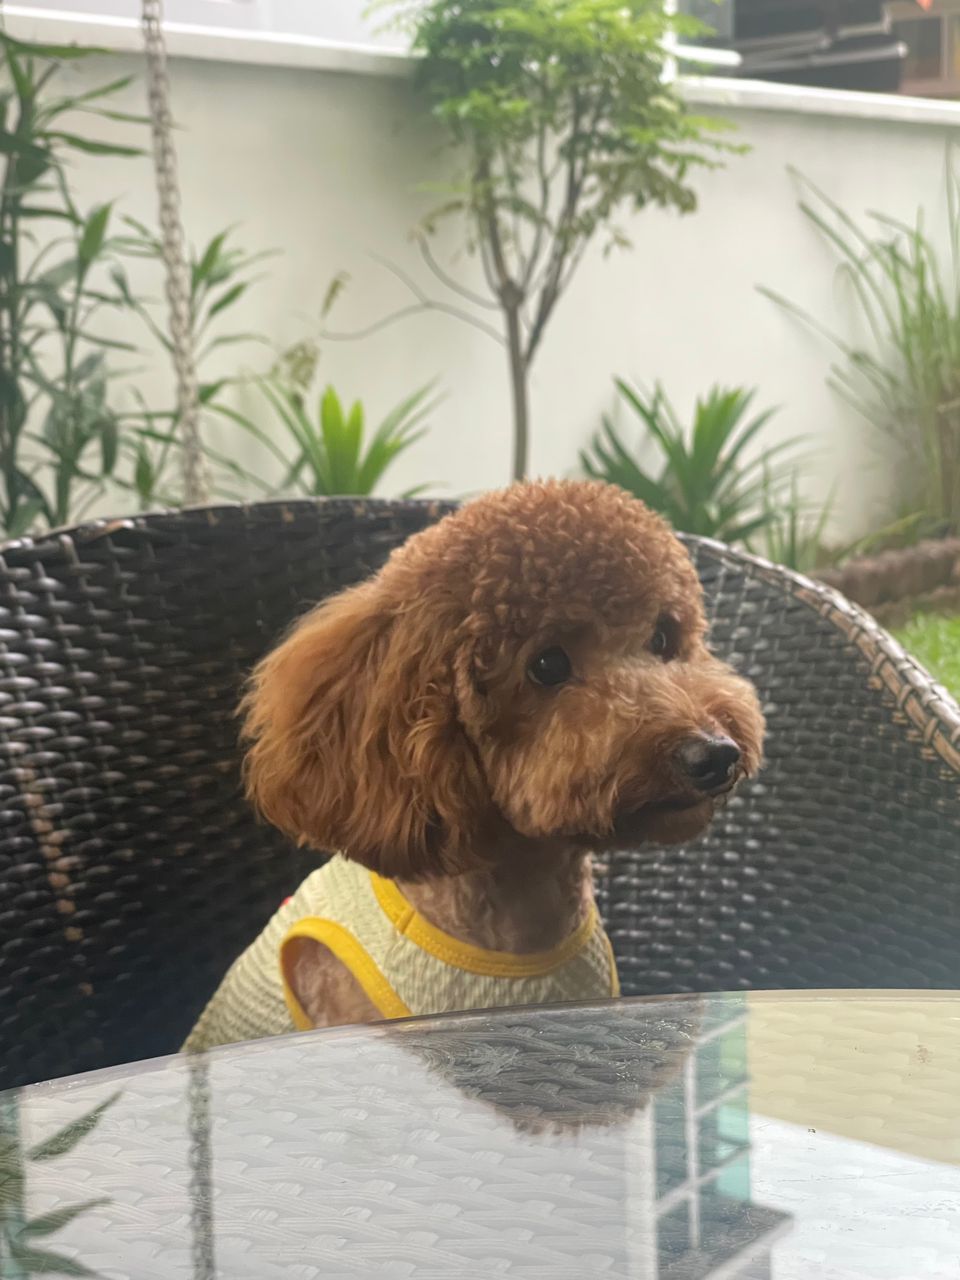 https://images.dog.ceo/breeds/poodle-medium/WhatsApp_Image_2022-08-06_at_4.48.38_PM.jpg